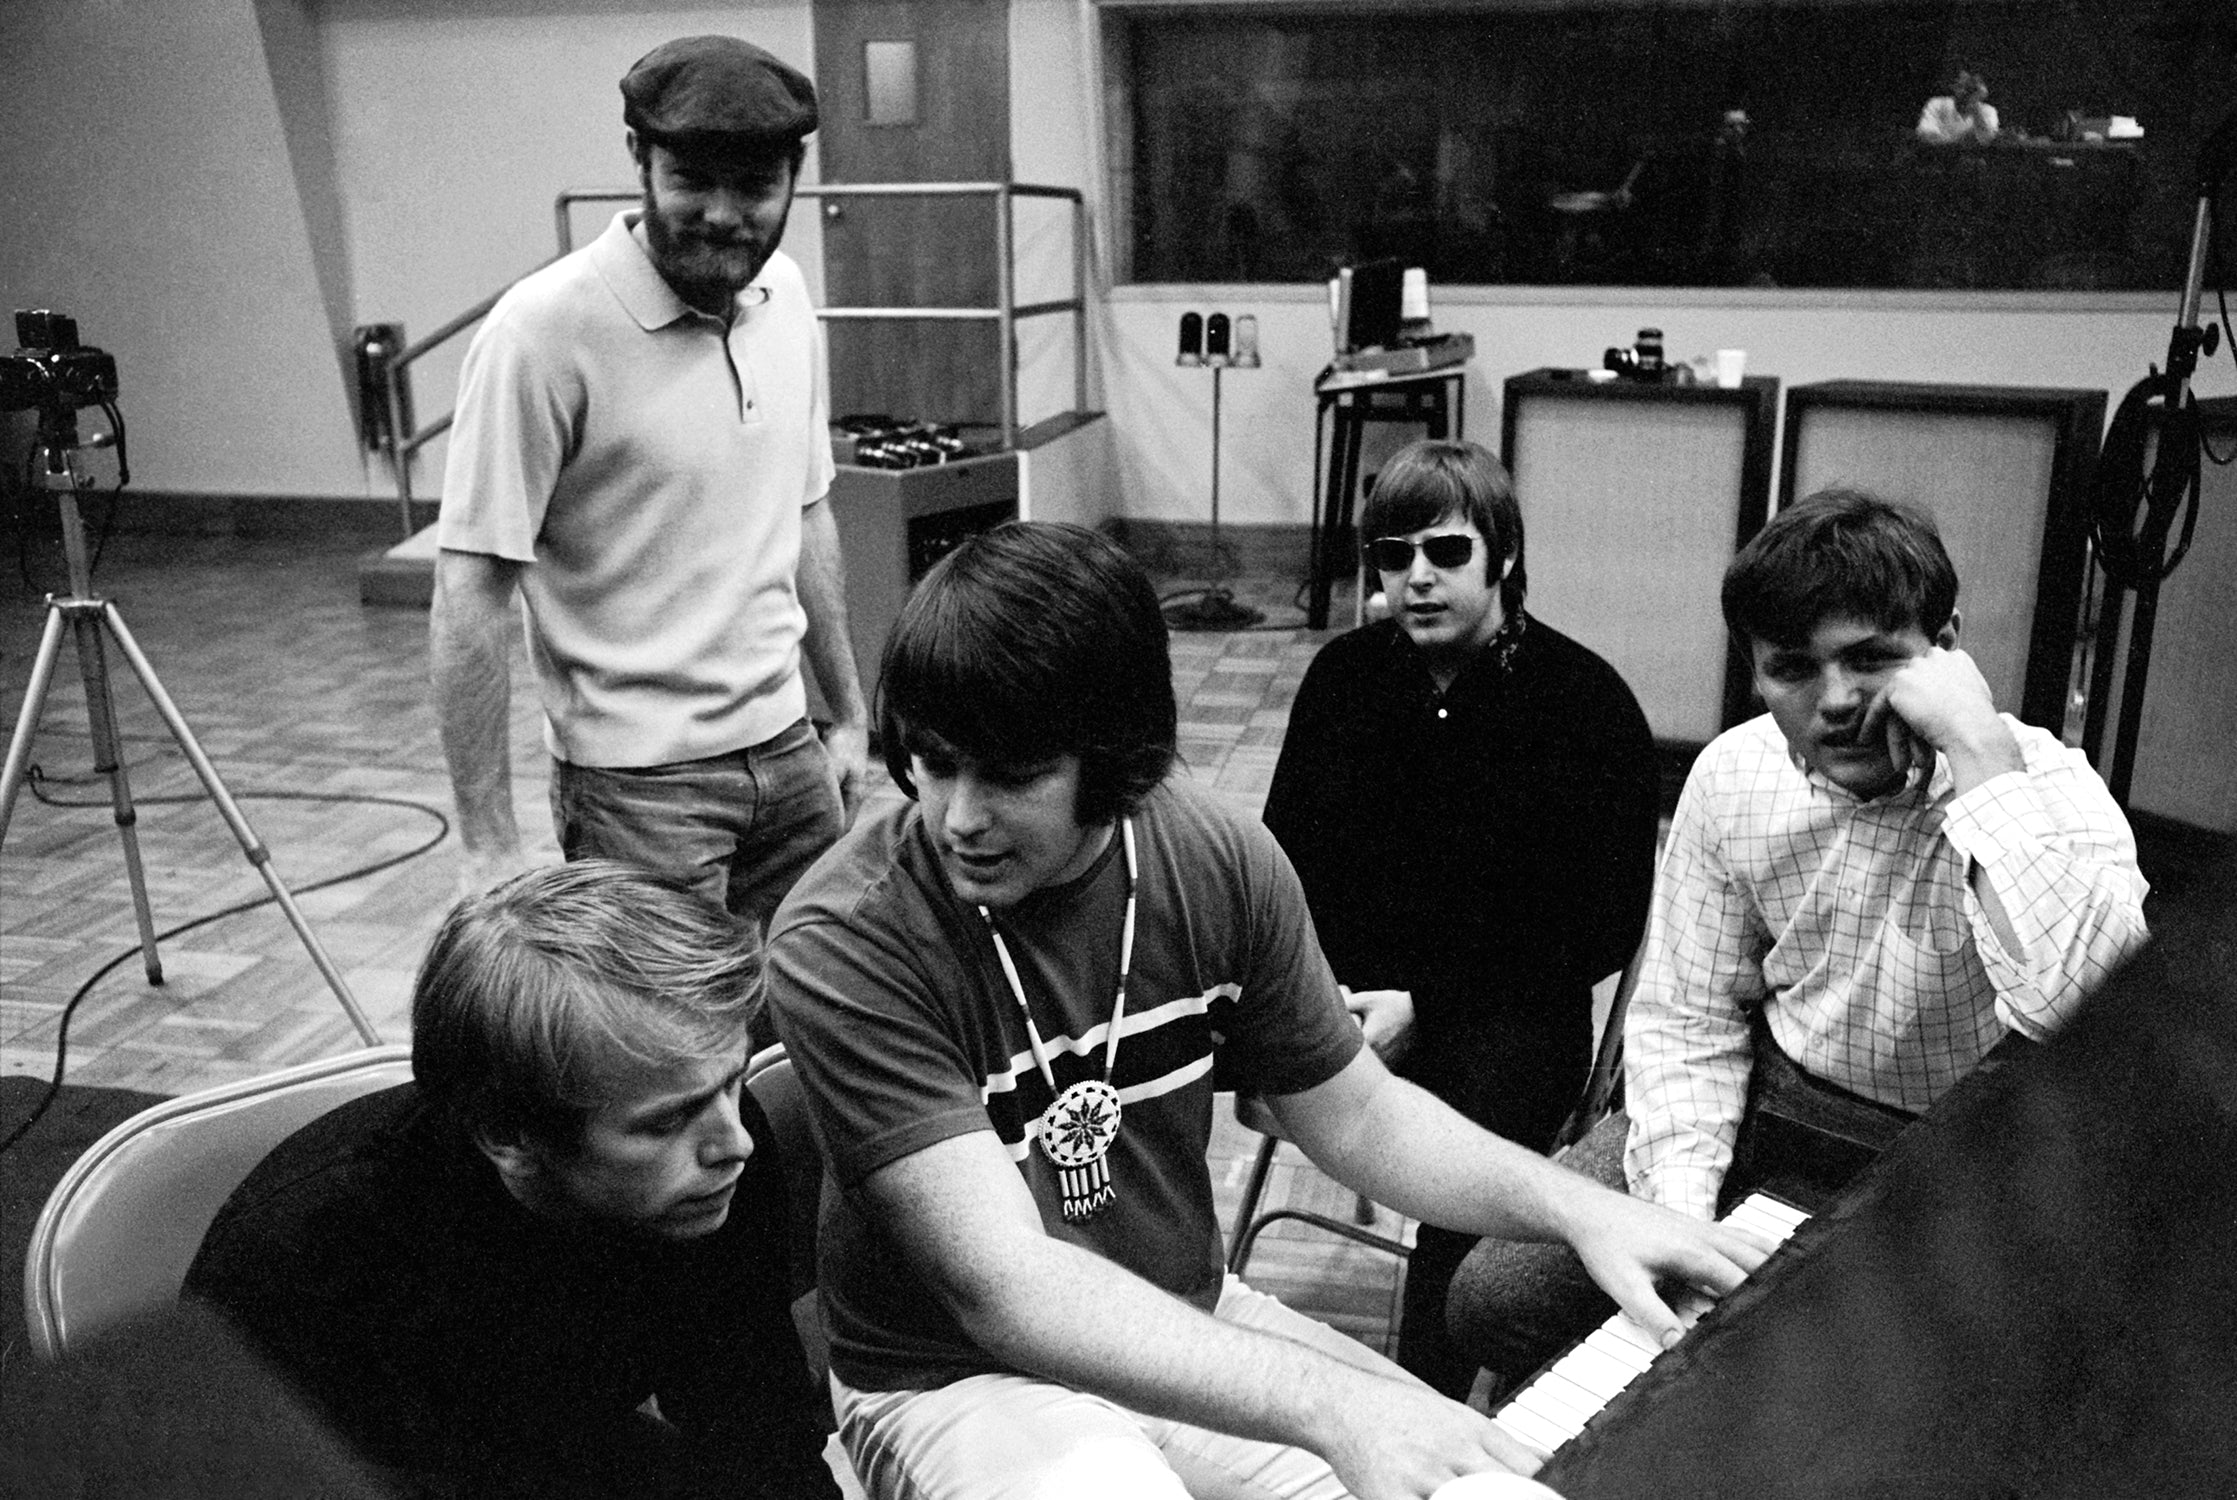 The Beach Boys, Vibrations (Smile) - Recording Session - Morrison Hotel Gallery